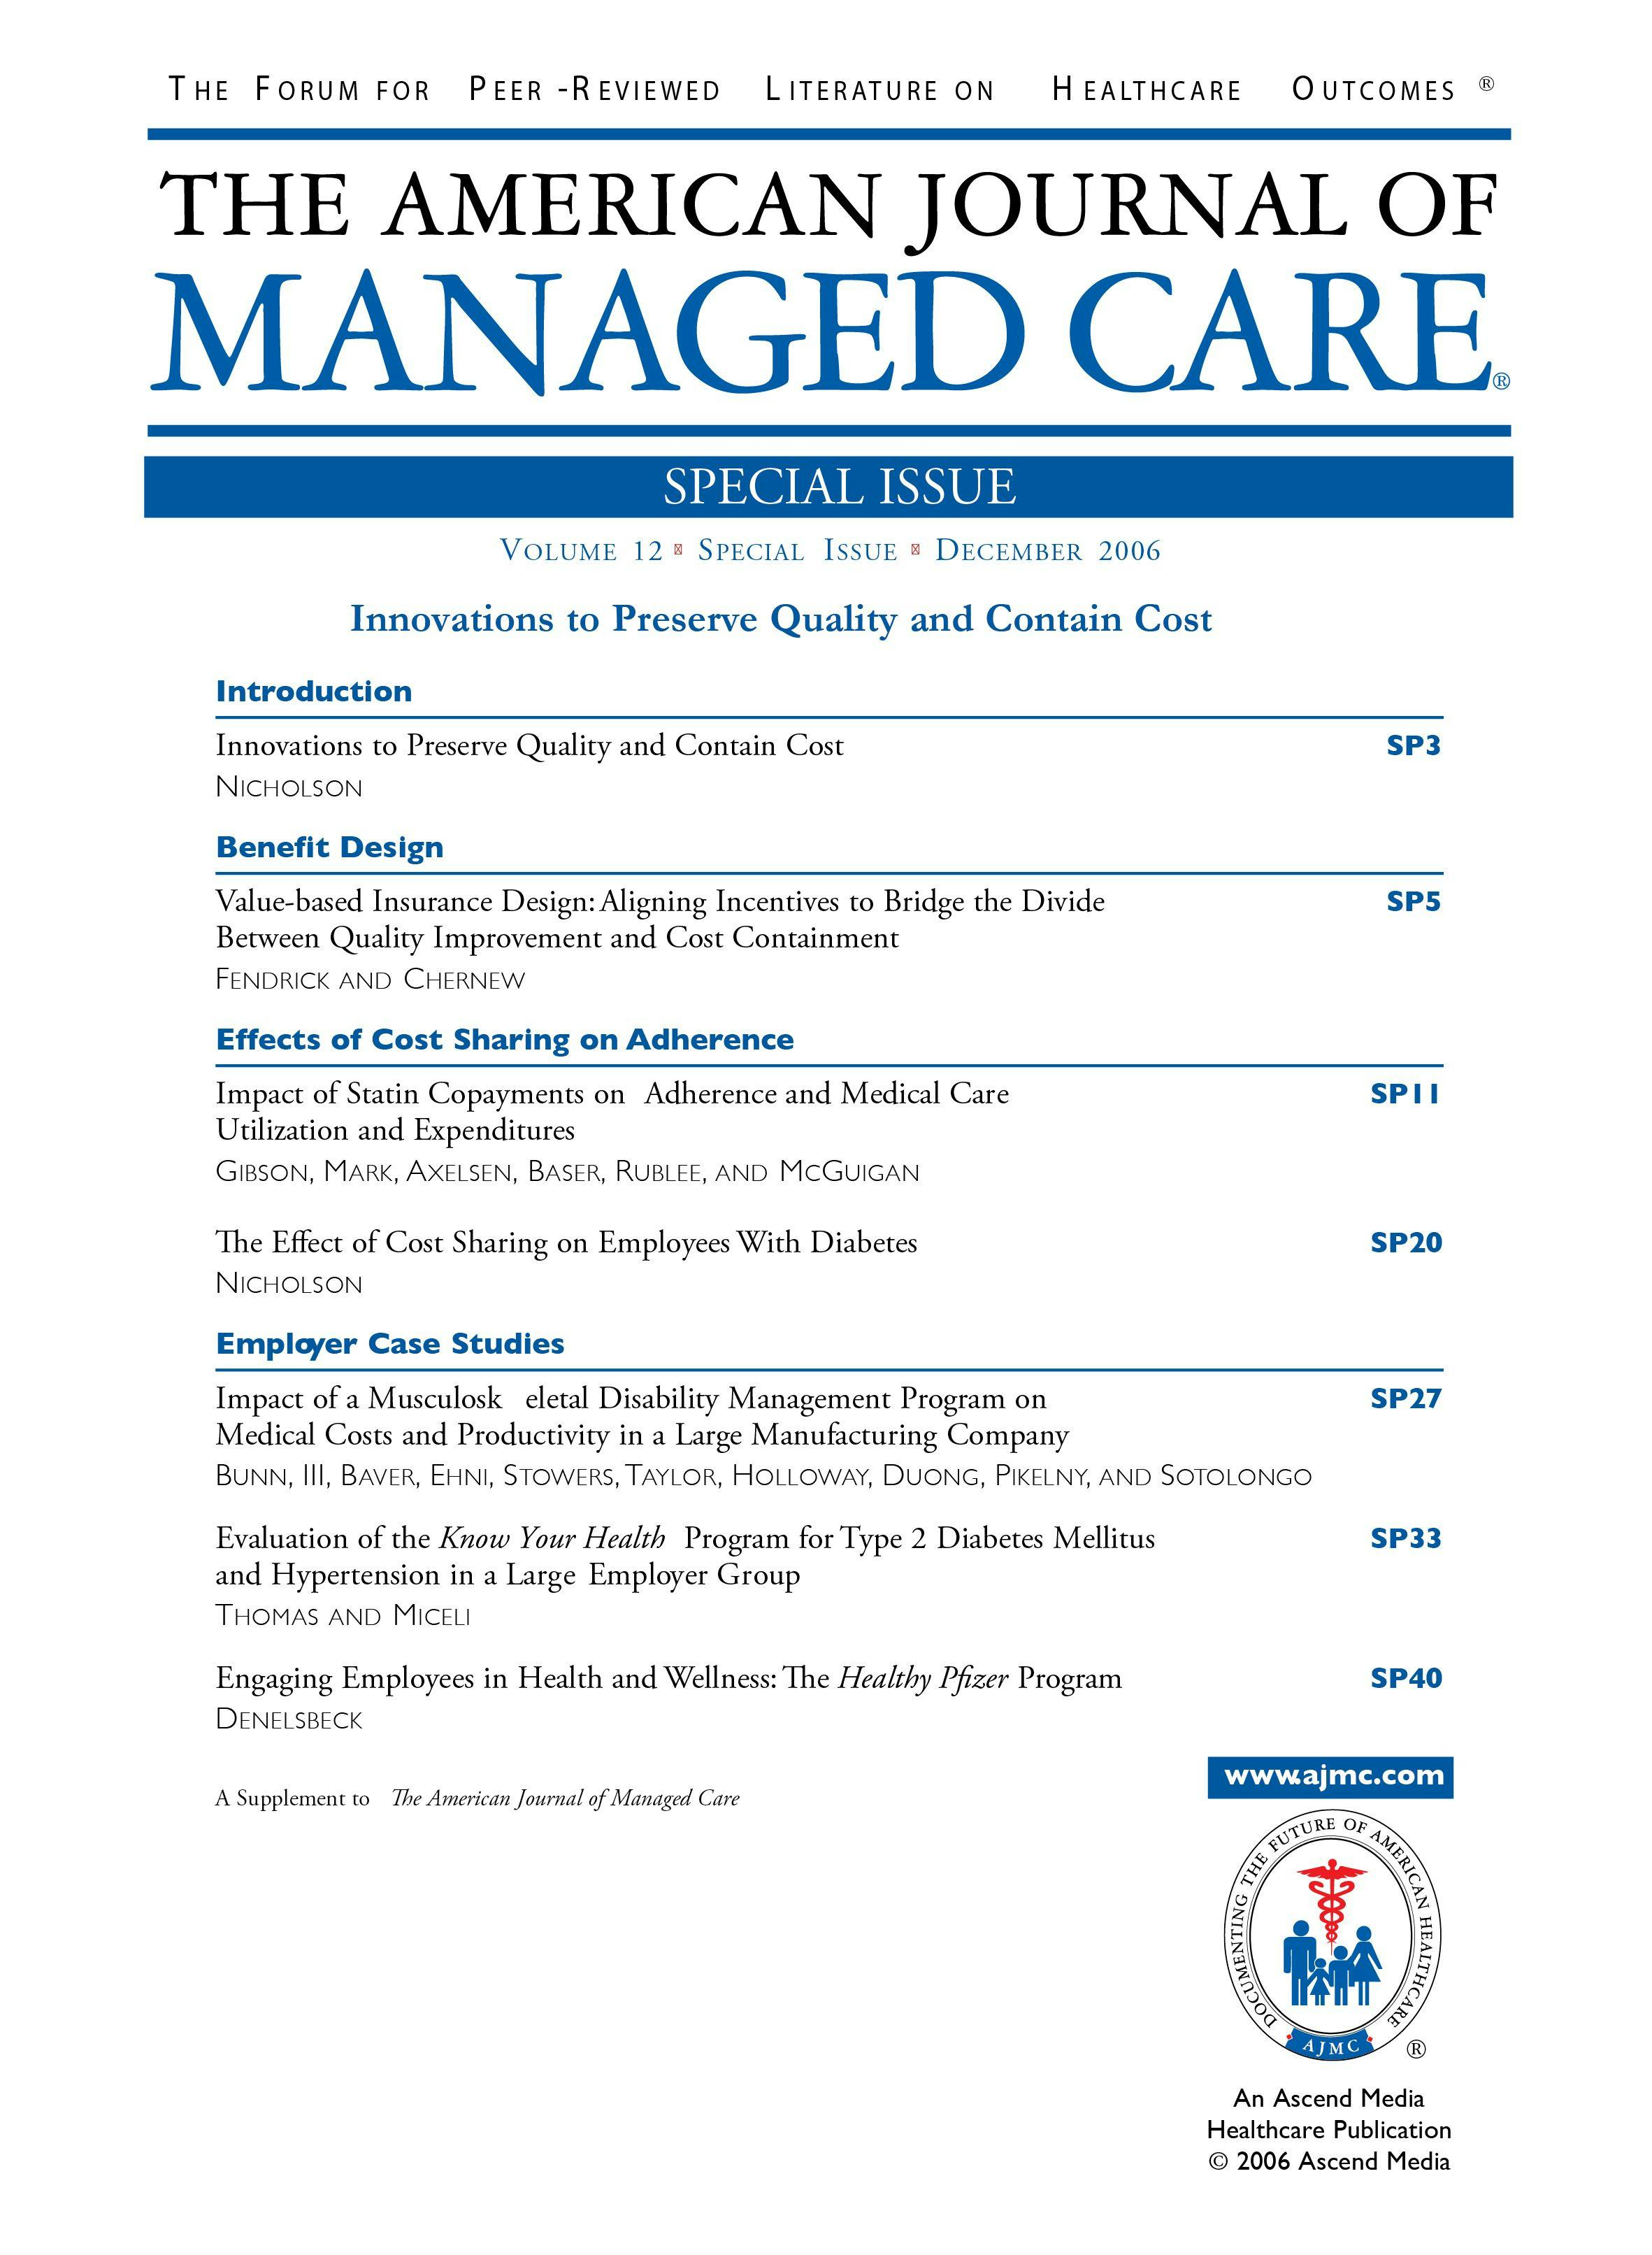 December 2006 - Special Issue